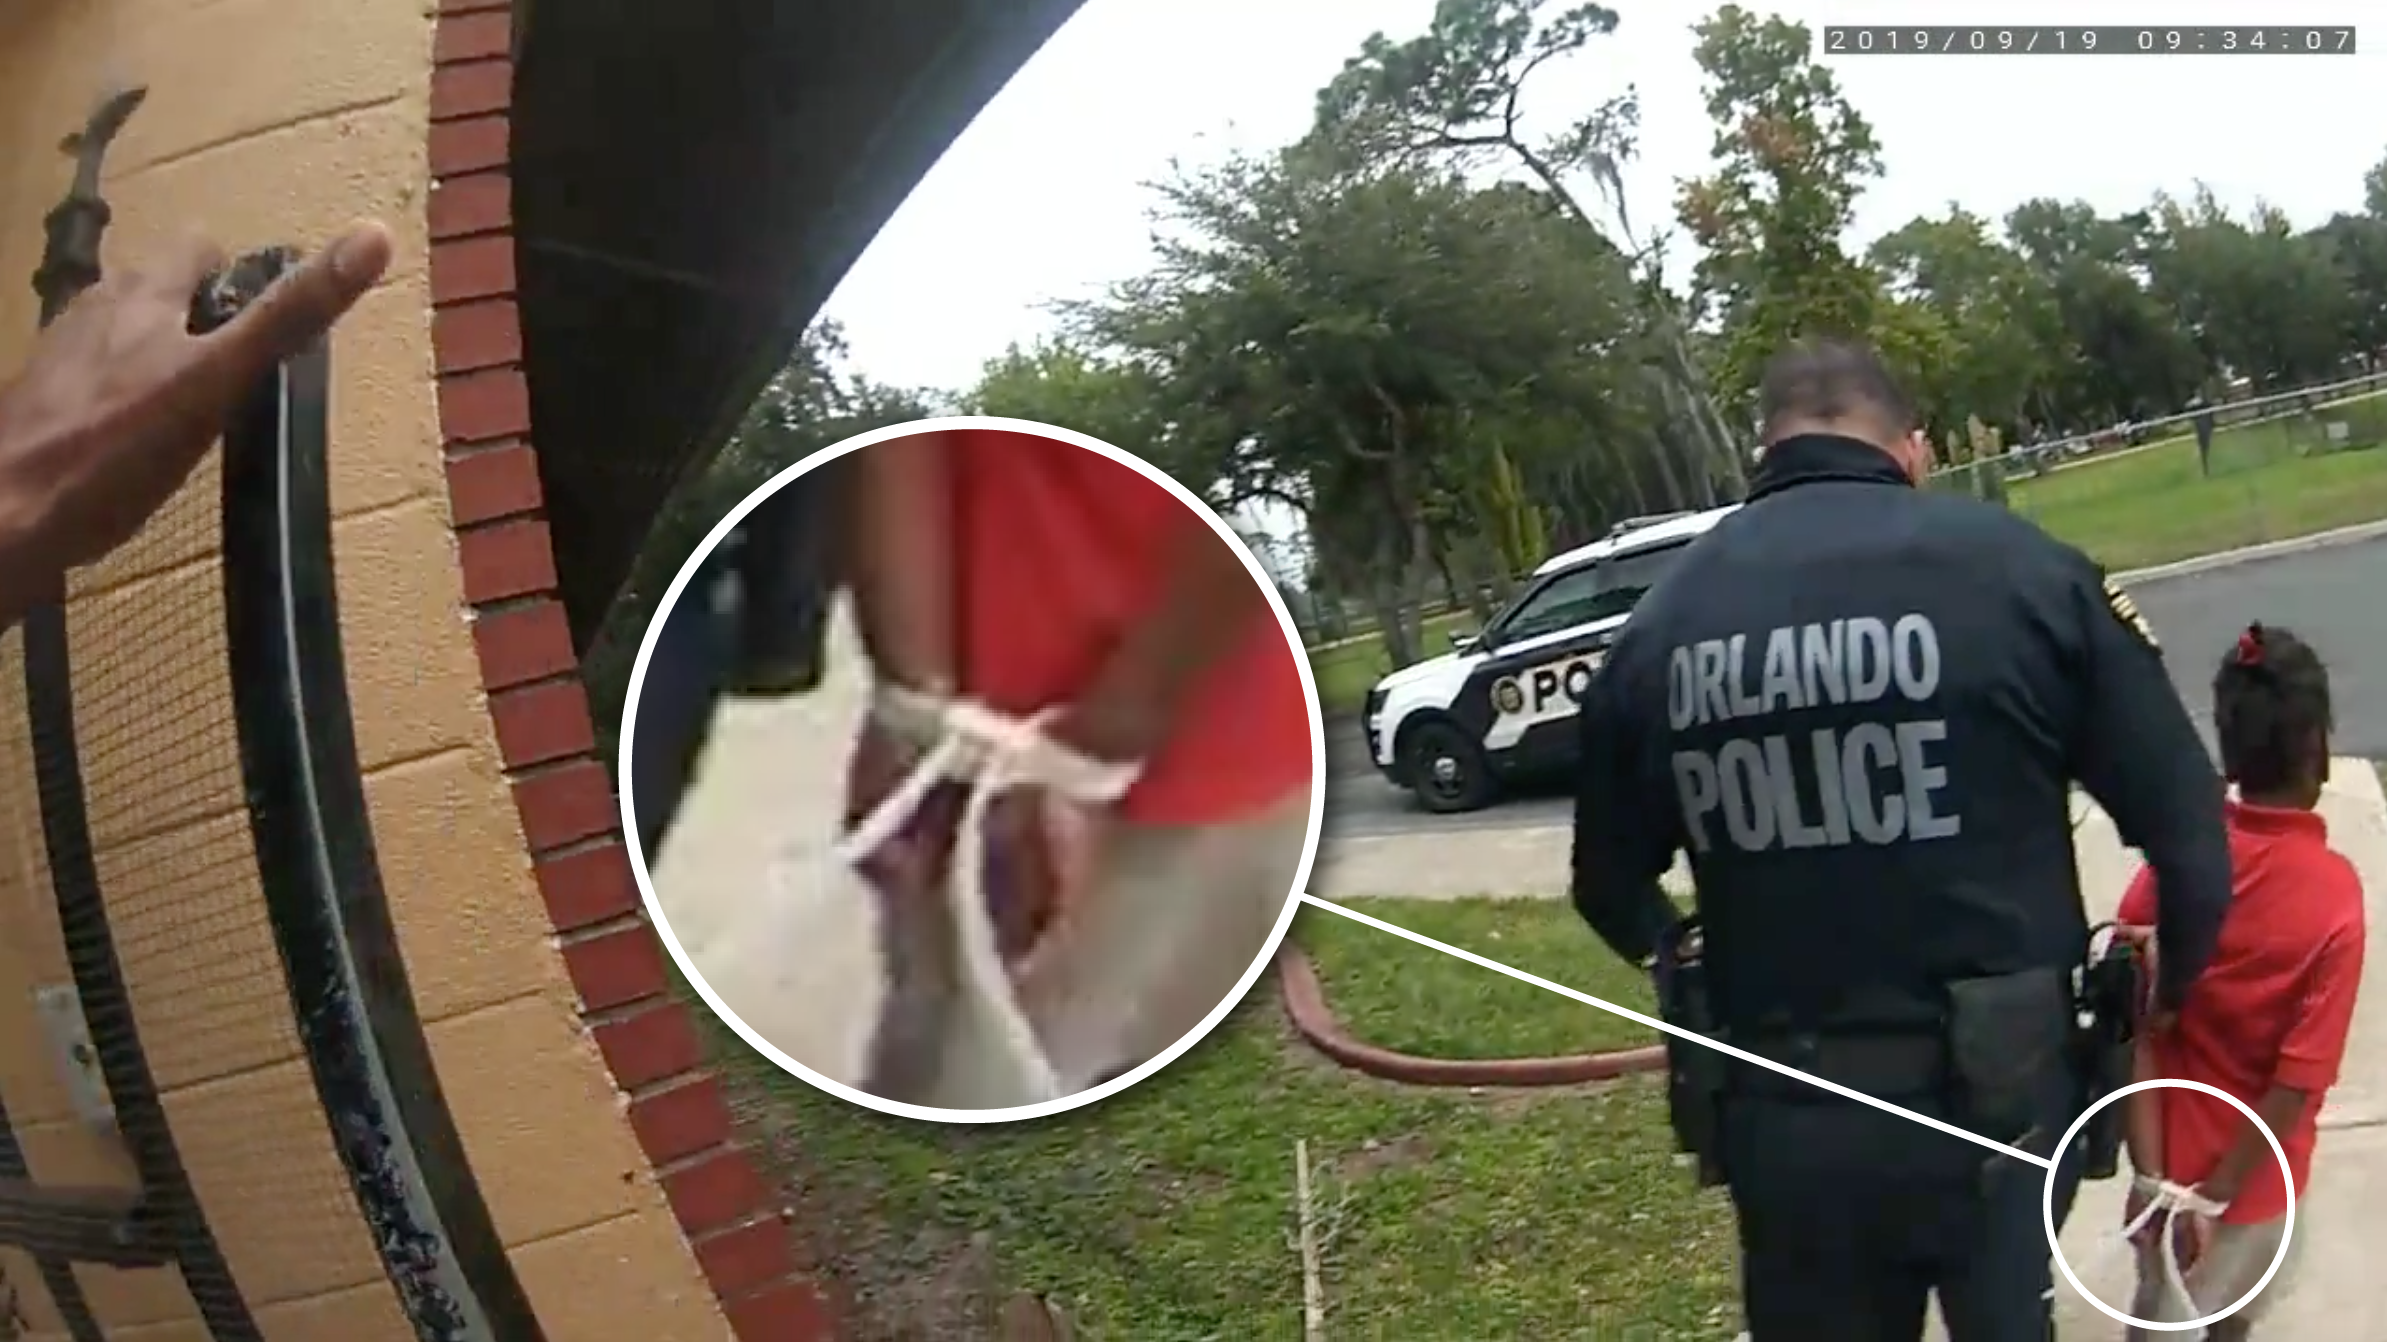 An Orlando police officer leads 6-year-old Kaia Rolle out of her school with her hands tied behind her back with zip ties.